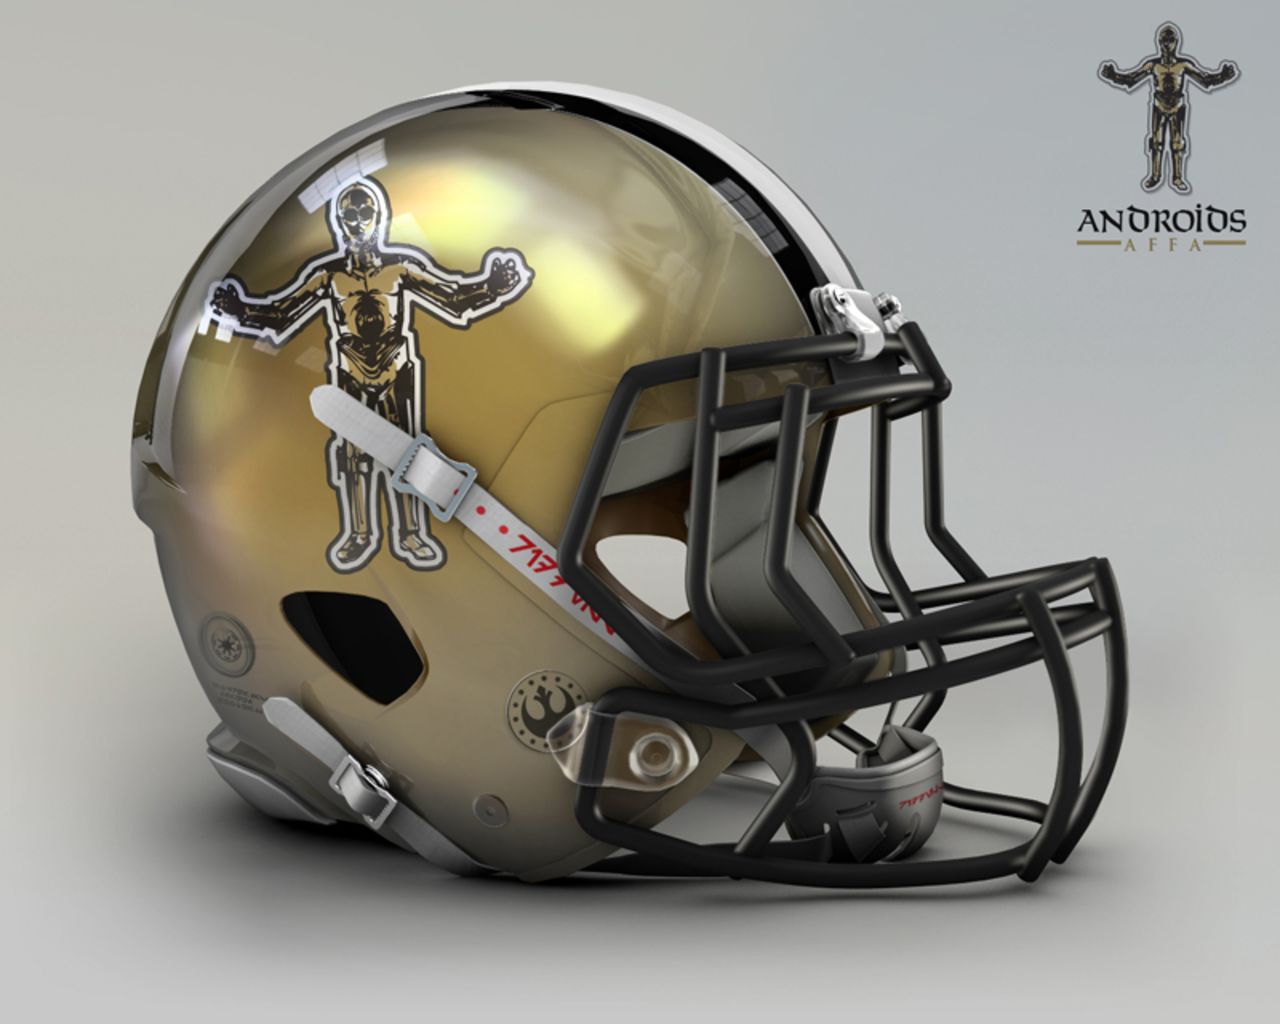 "The easiest way to create a new fusion for the logo is the color code, and each one has a close approximation with the star wars world," says Raya. That's why the golden <a href="http://www.neworleanssaints.com/" target="_blank" target="_blank">New Orleans Saints</a> needed just a quick transition to become the Androids, modeled after C-3PO.